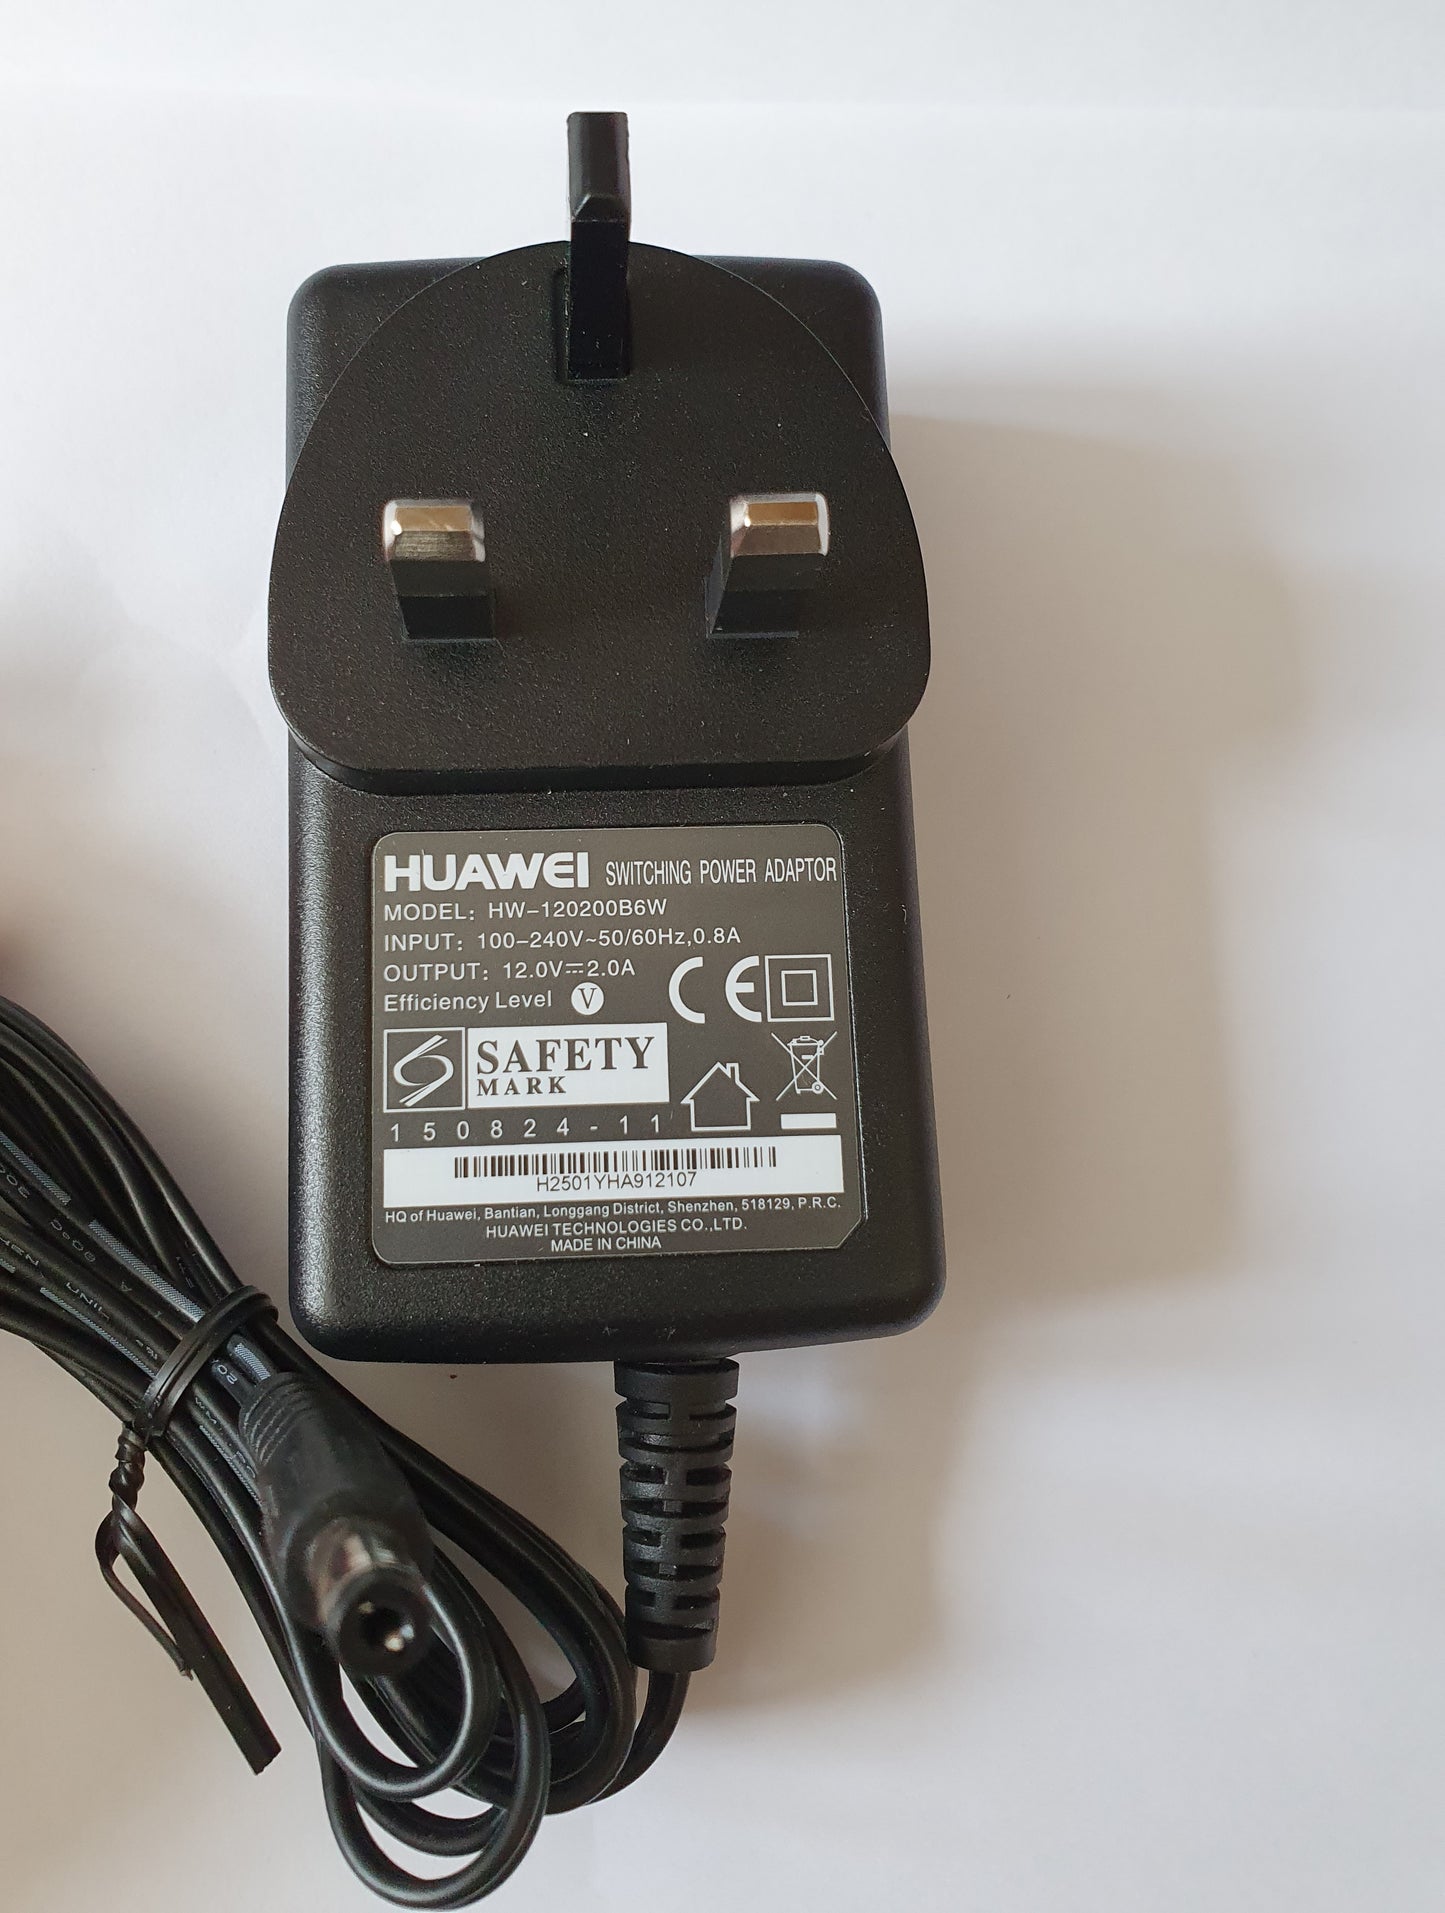 Huawei Power Supply 12V 2A for use with Talk Talk Super Router HG635, HG633, Youview DN360T, DN370T and DN372T PSU